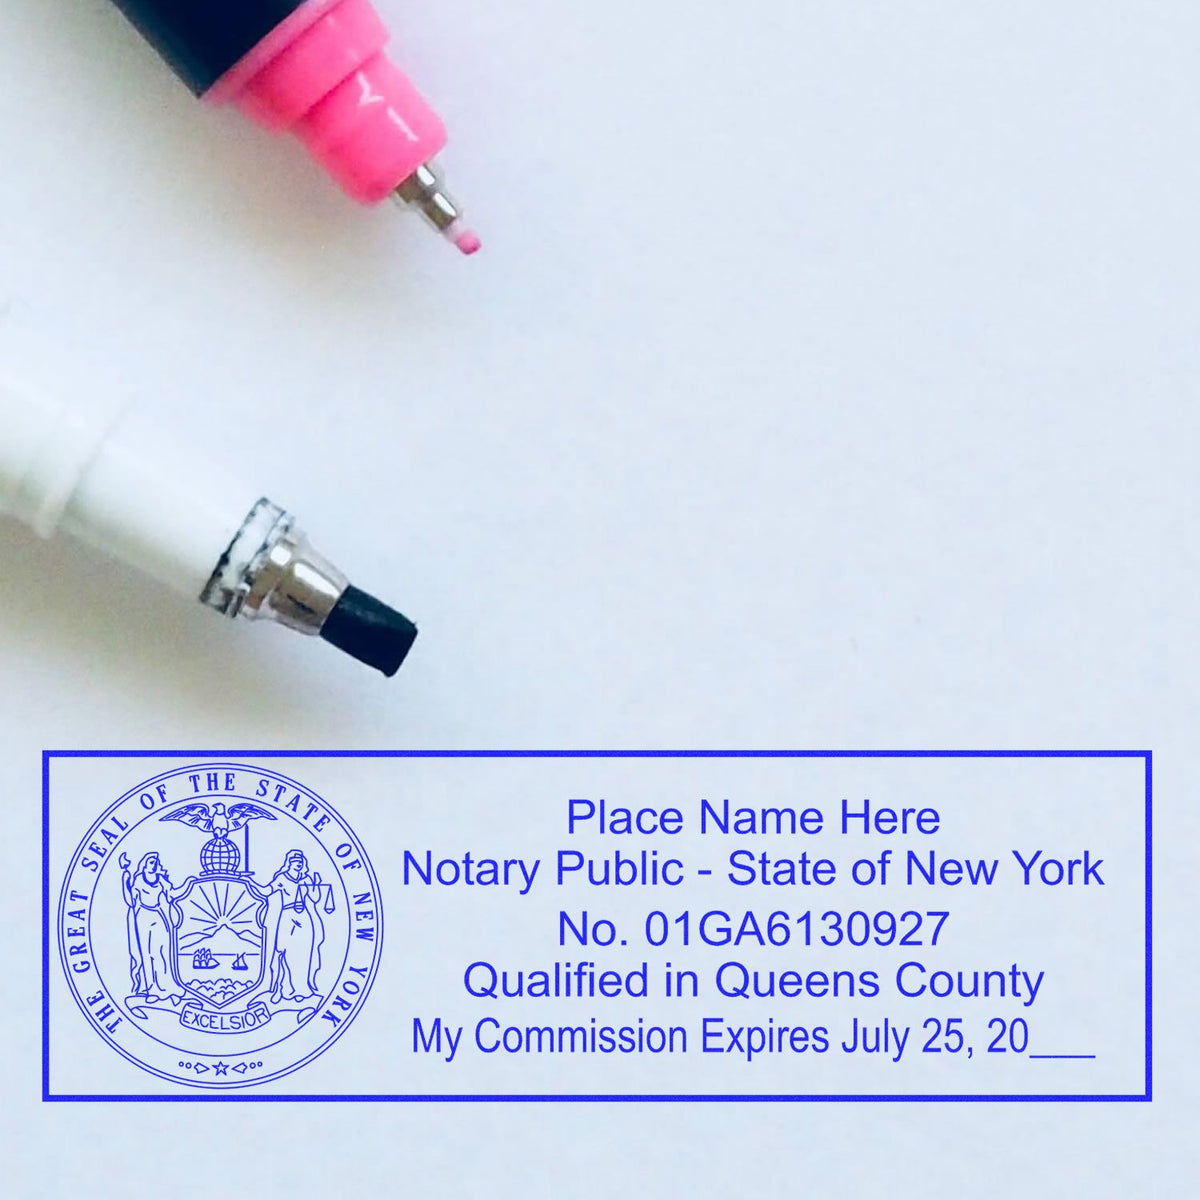 A photograph of the Heavy-Duty New York Rectangular Notary Stamp stamp impression reveals a vivid, professional image of the on paper.